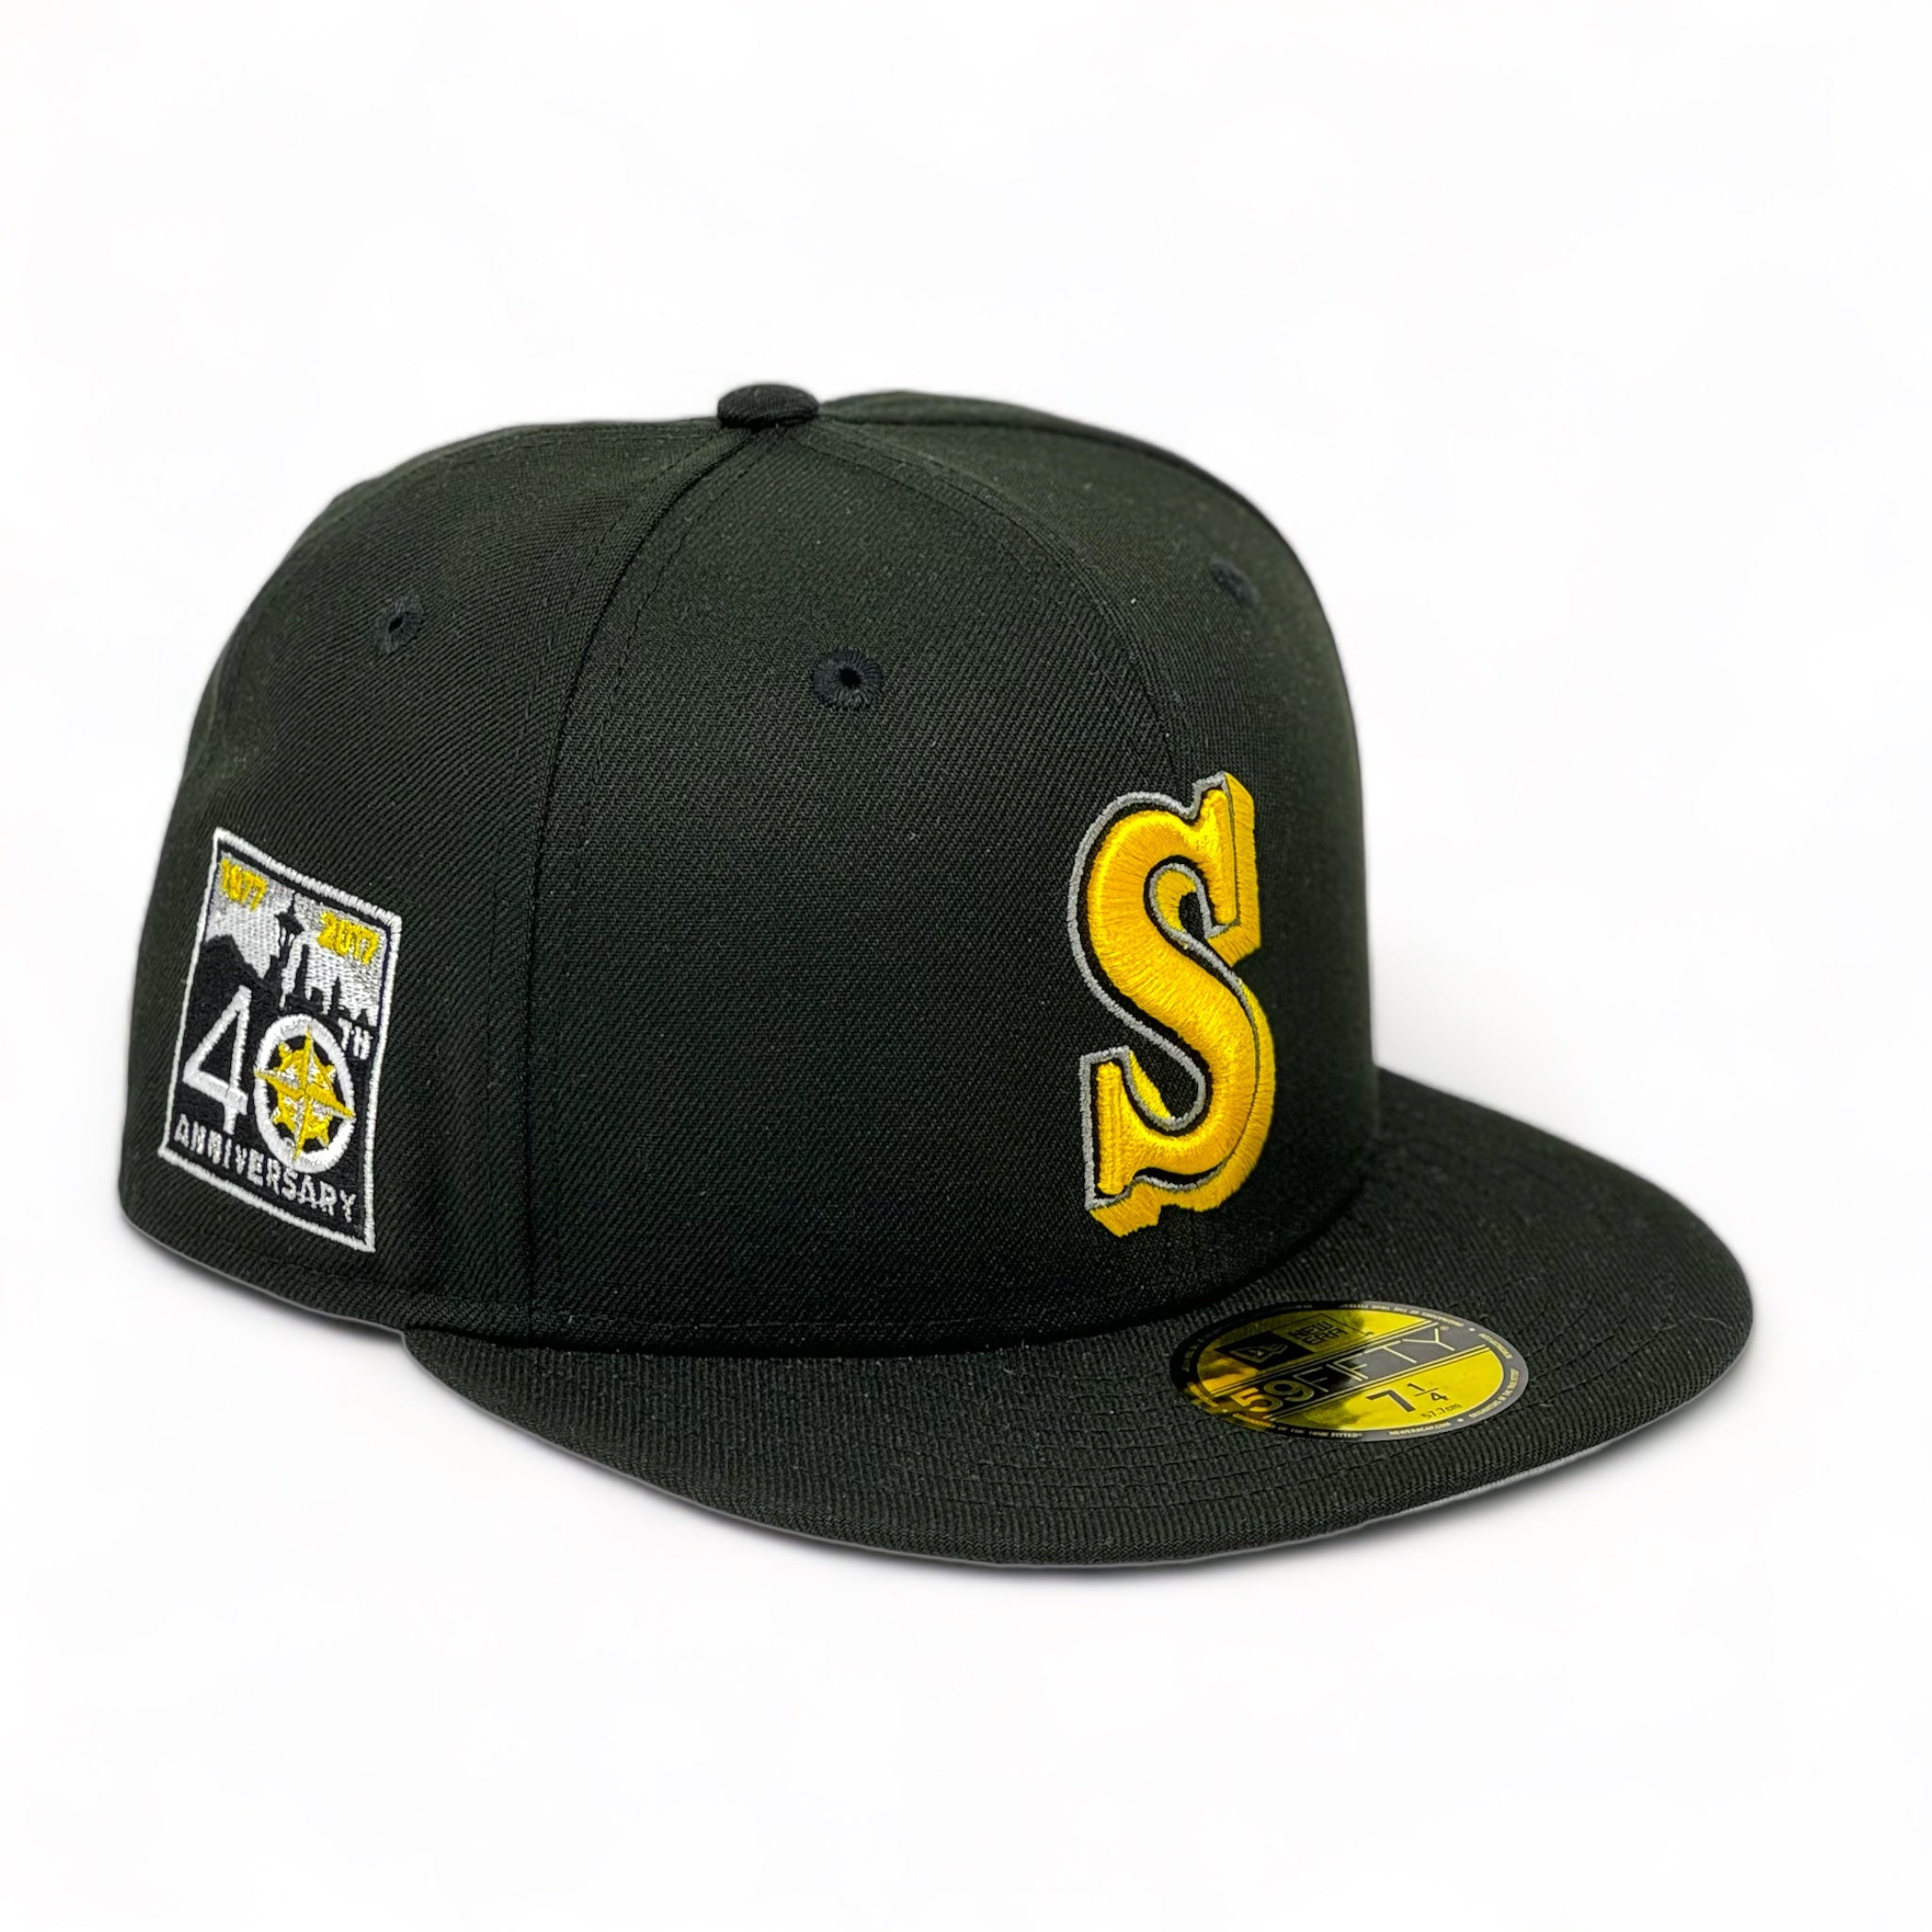 SEATTLE MARINERS (BLK/YELLOW) 40TH ANN NEW ERA 59FIFTY EXCLUSIVE FITTED